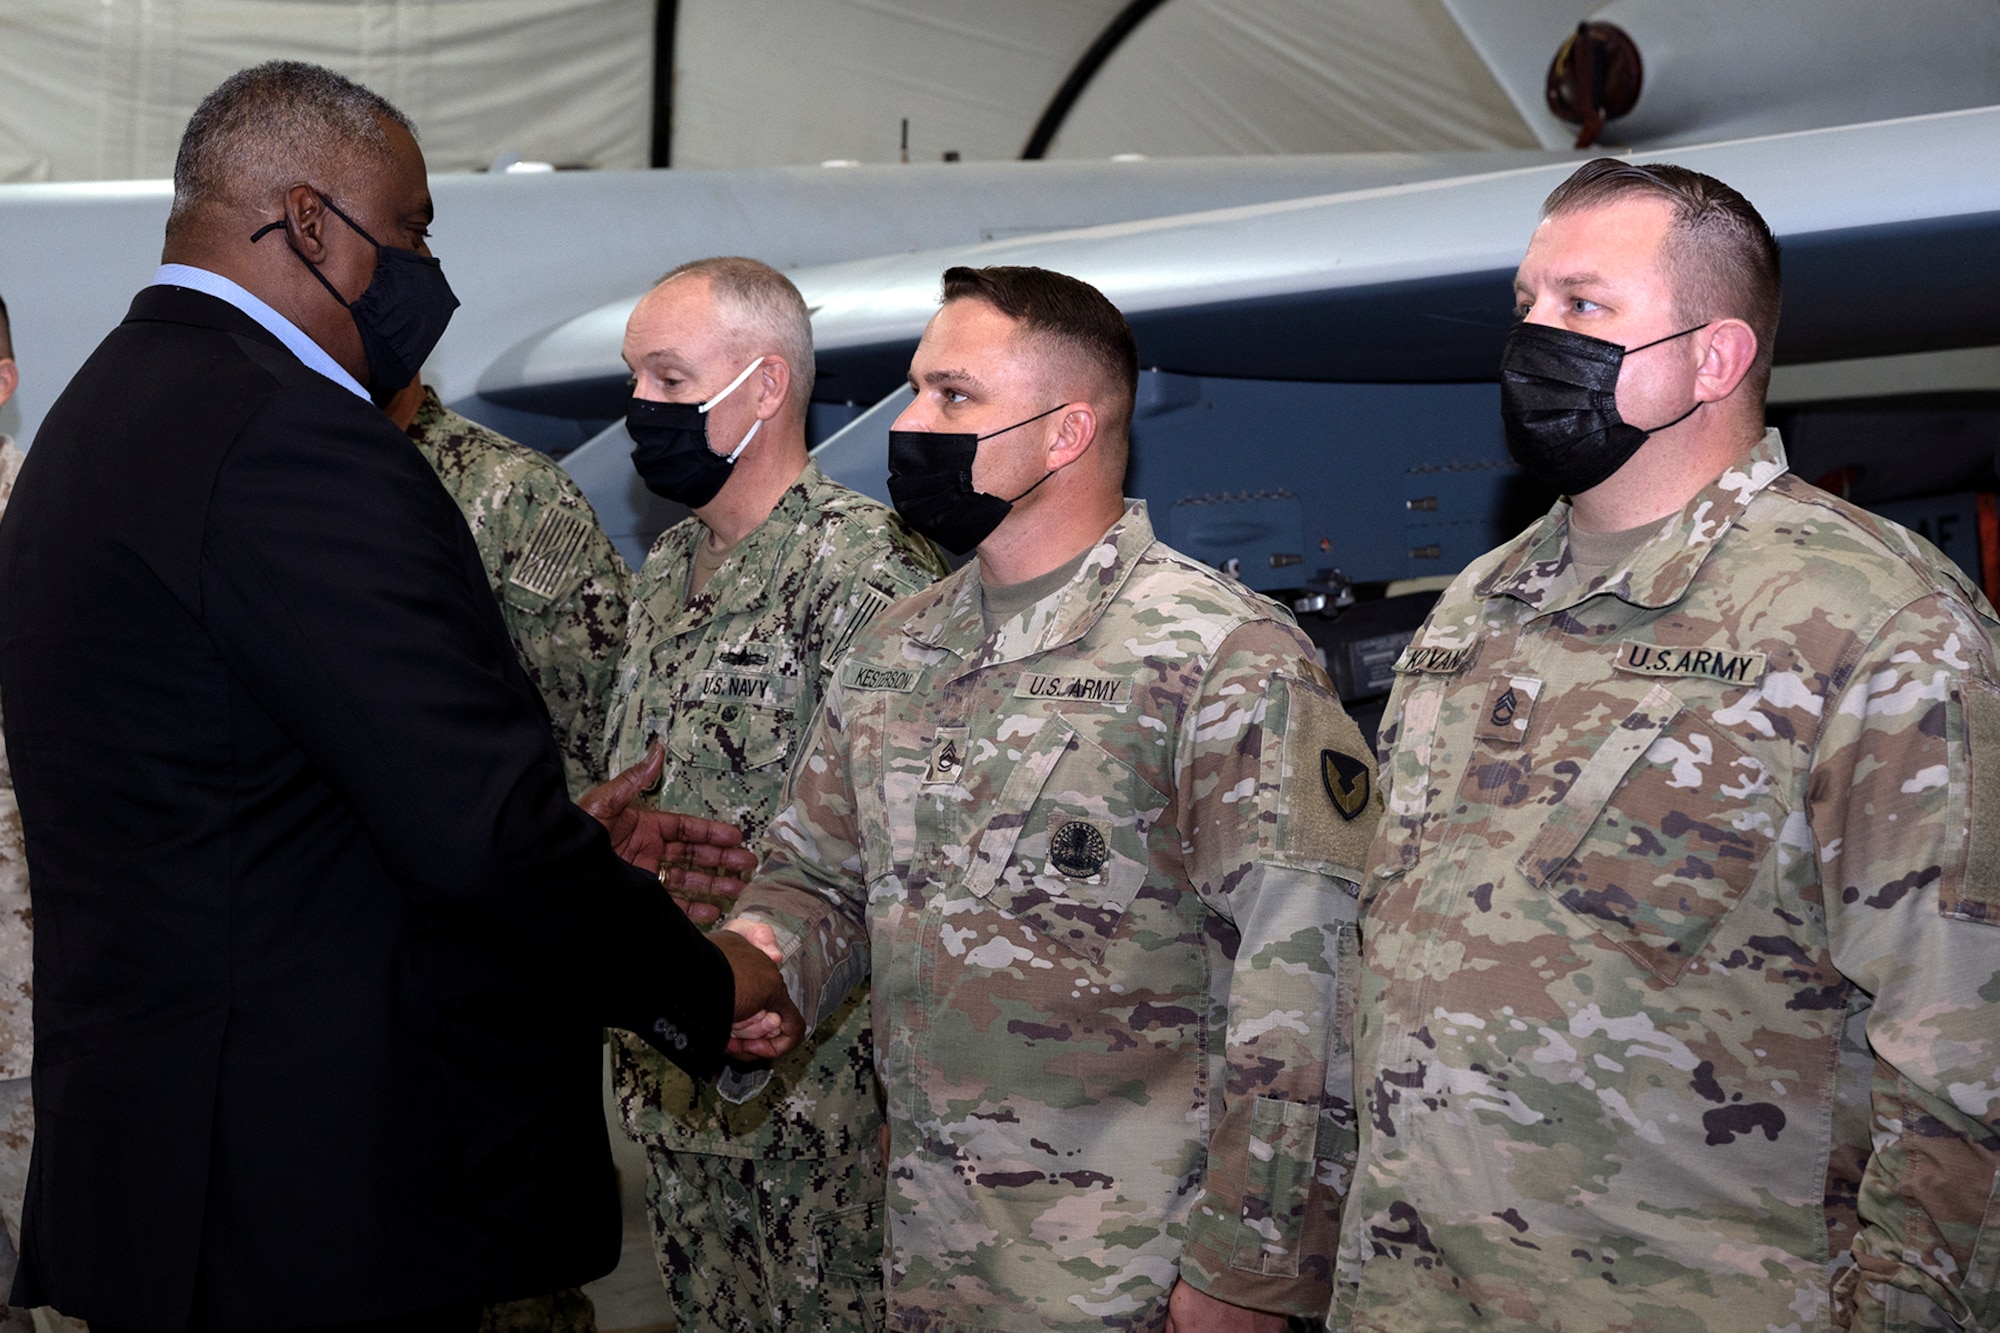 Secretary of Defense Lloyd J. Austin III coins Sgt. 1st Class Justin Kesterson at Al Dhafra Air Base, United Arab Emirates, Nov. 22, 2021. Austin Traveled to the UAE to meet with senior government officials to reaffirm the US-UAE strategic partnership.